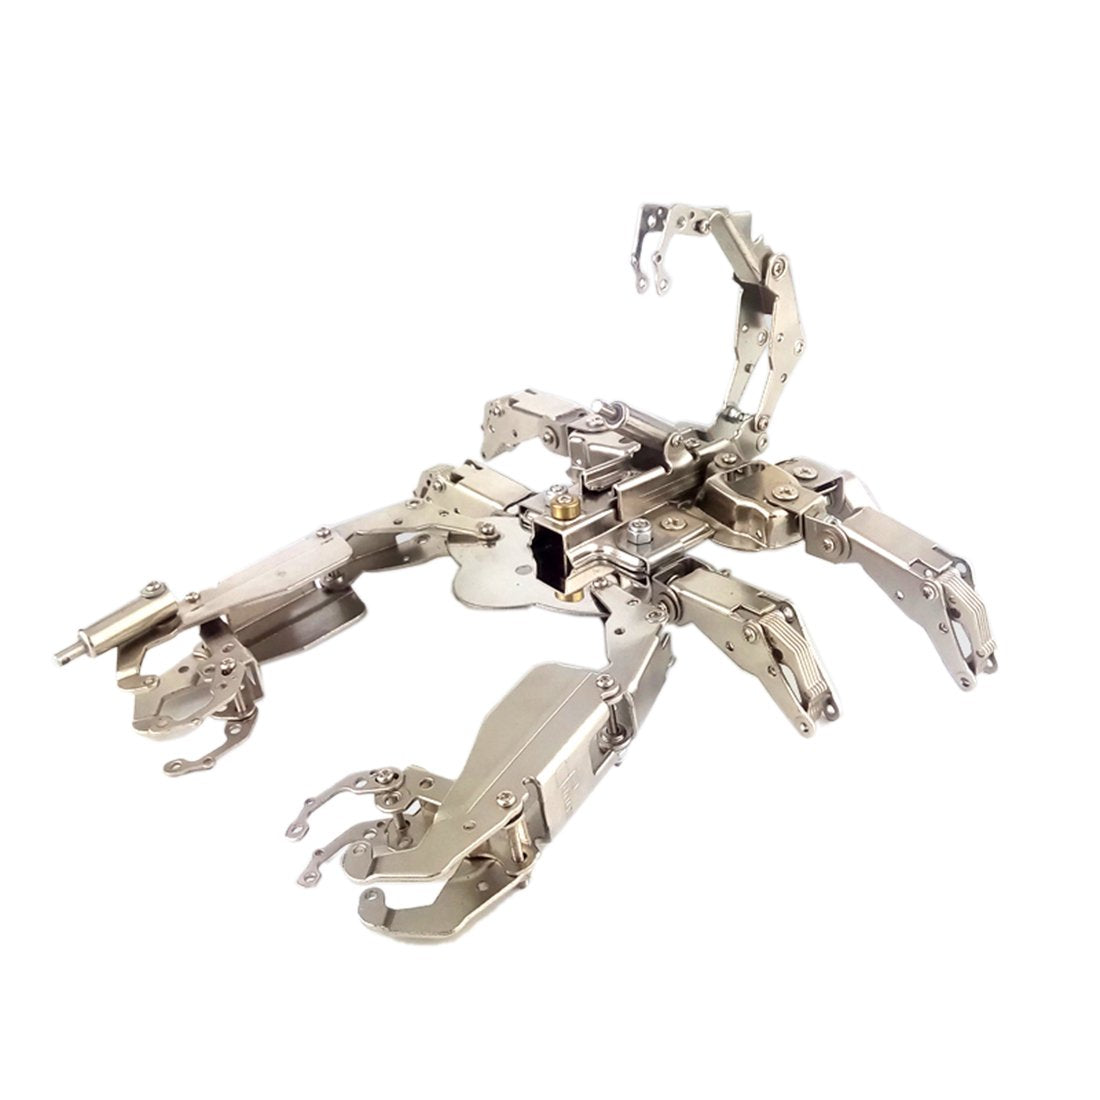 2in1 DIY Metal Assembly 3D Scorpion Deformation Robot Mecha Puzzle Kits